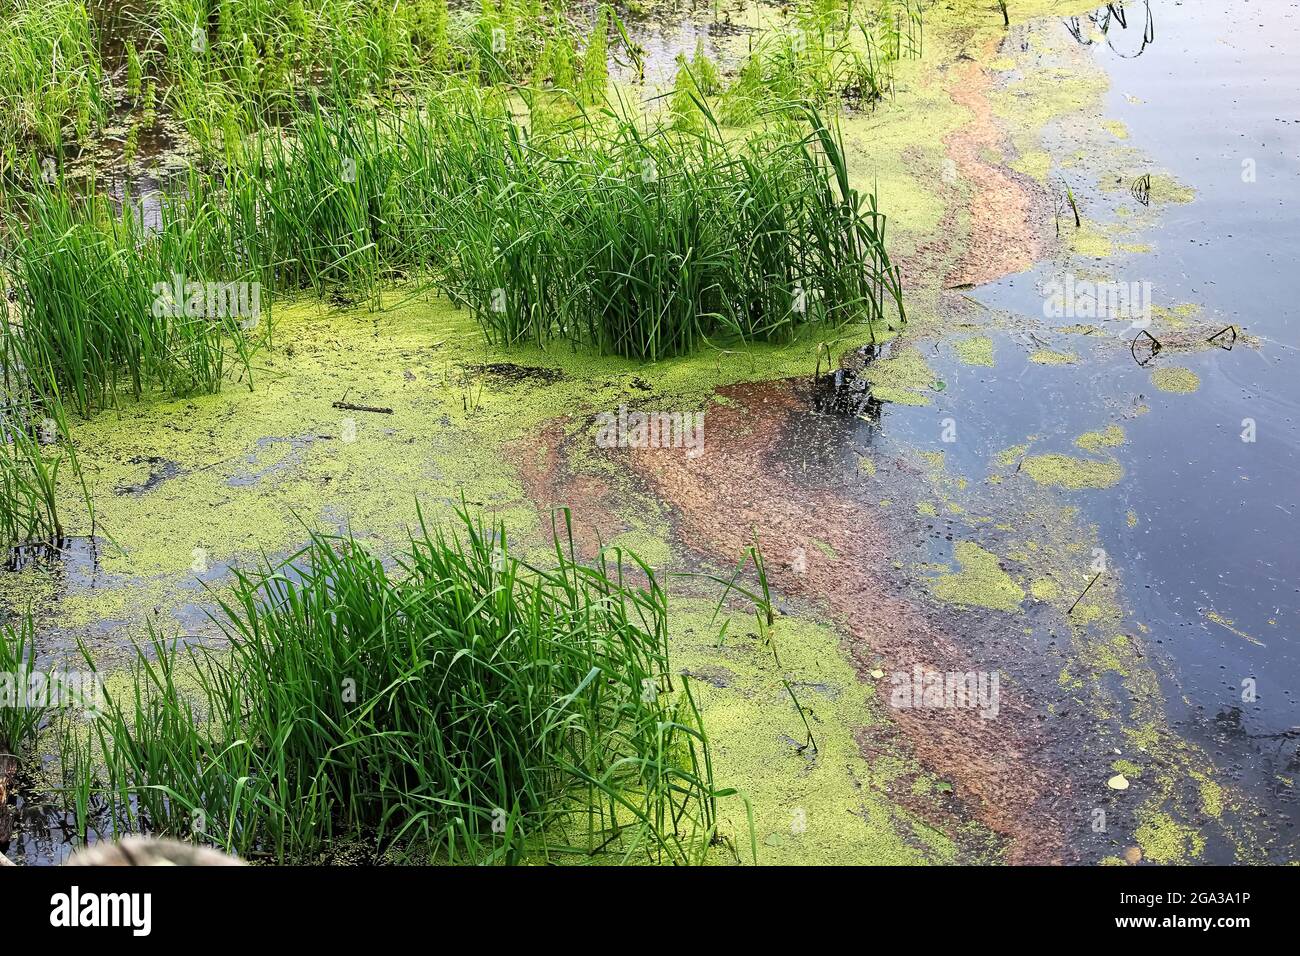 Pond edge covered in green duckweed plant Stock Photo